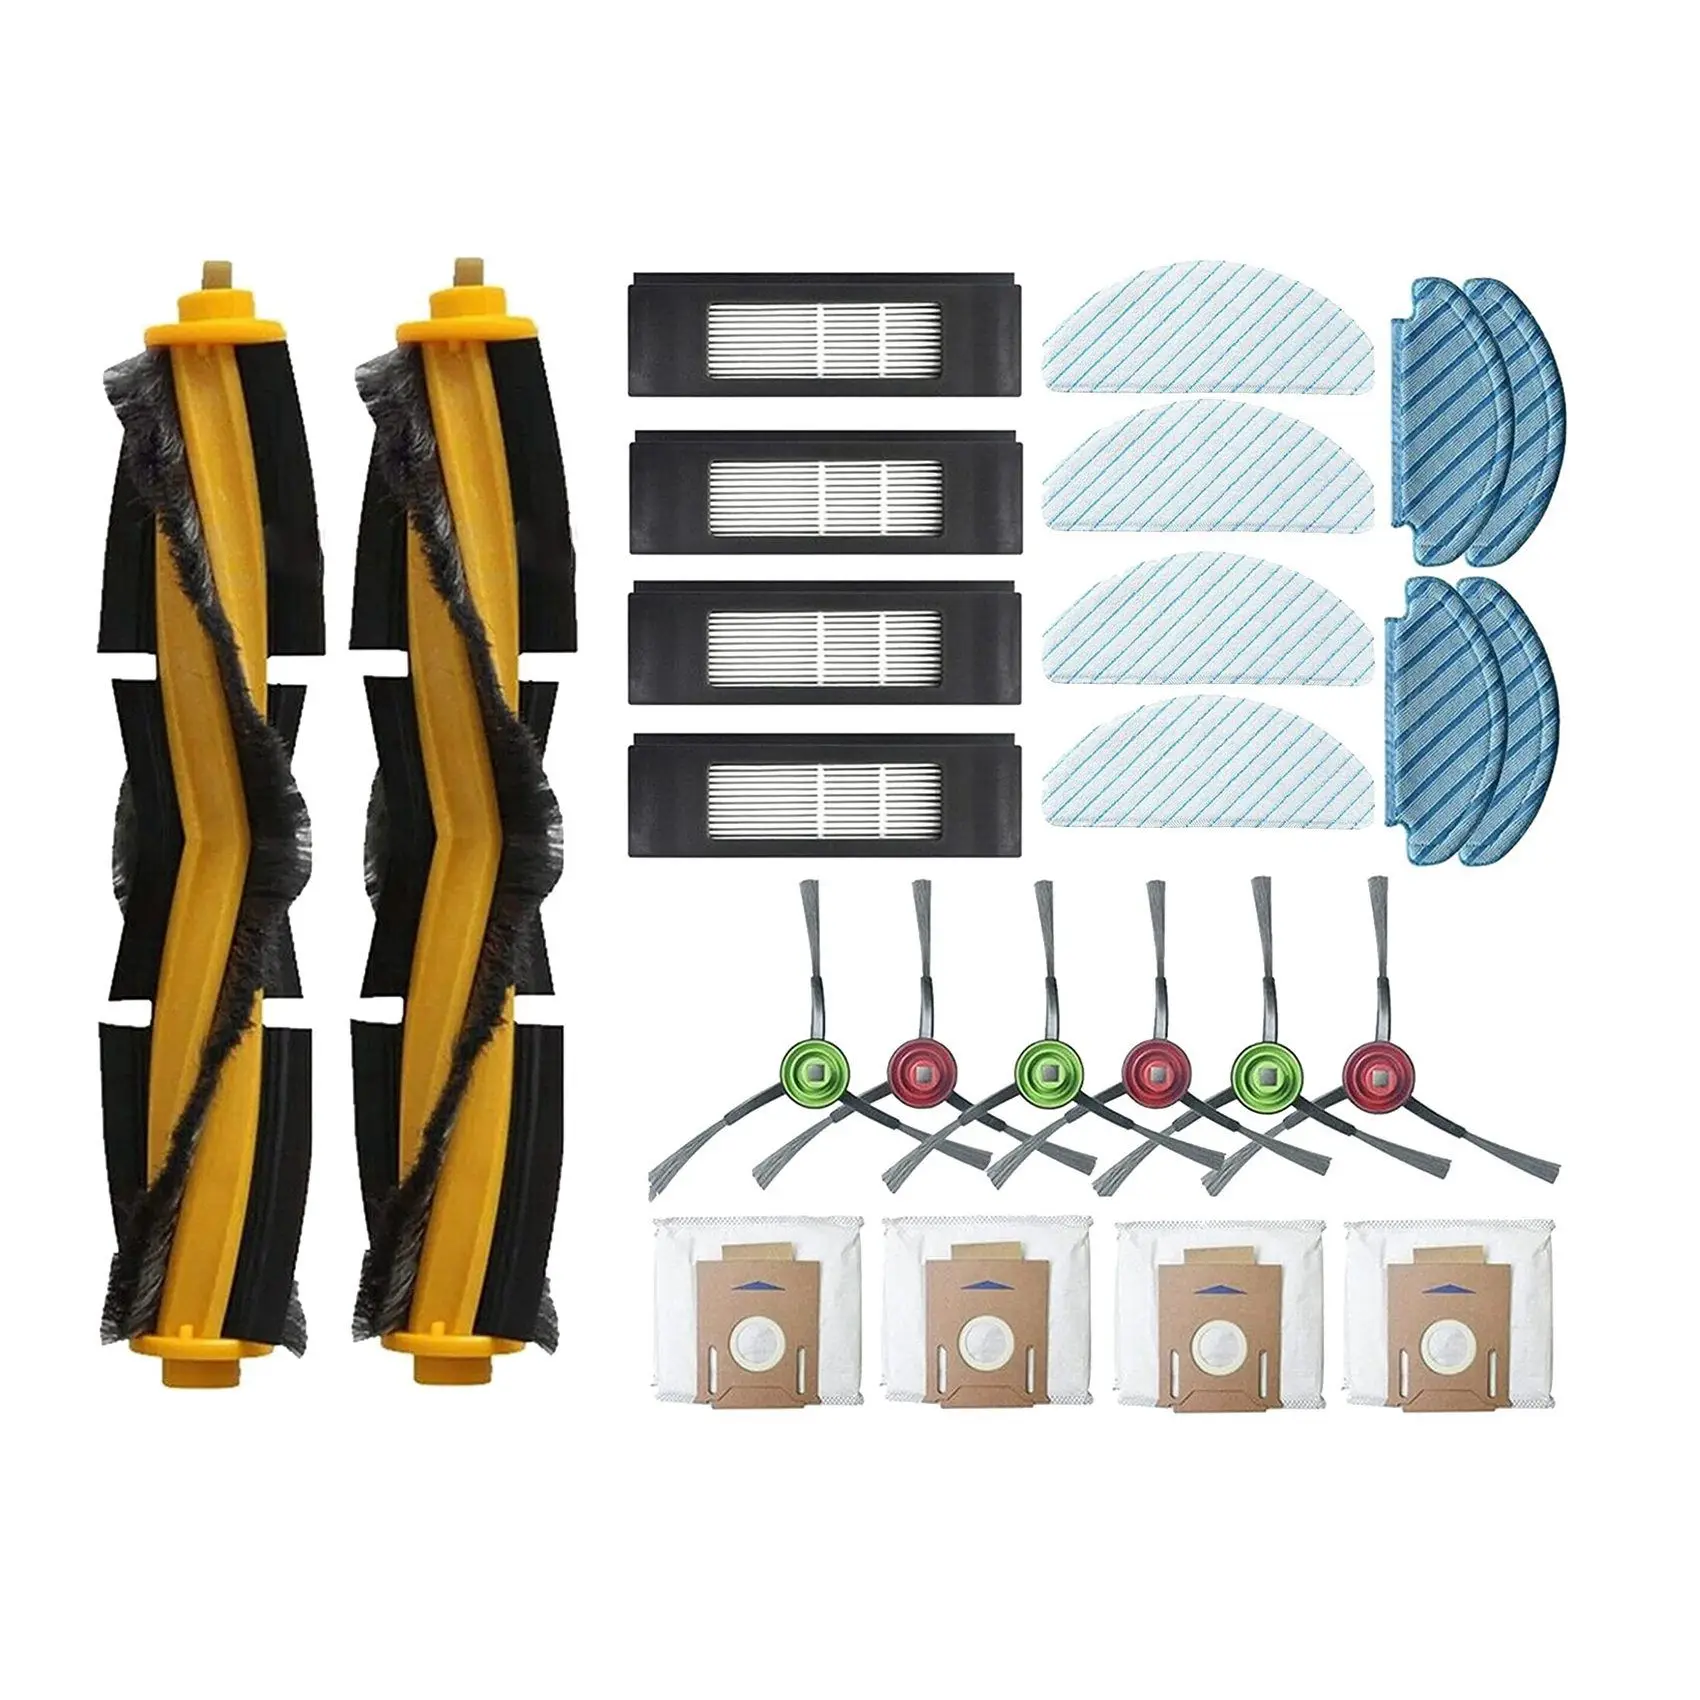 

24 Pcs Accessories Replacement Parts Kit Main Brush Side Brushes Filters Cleaning Mop Pads for Yeedi Vac Station